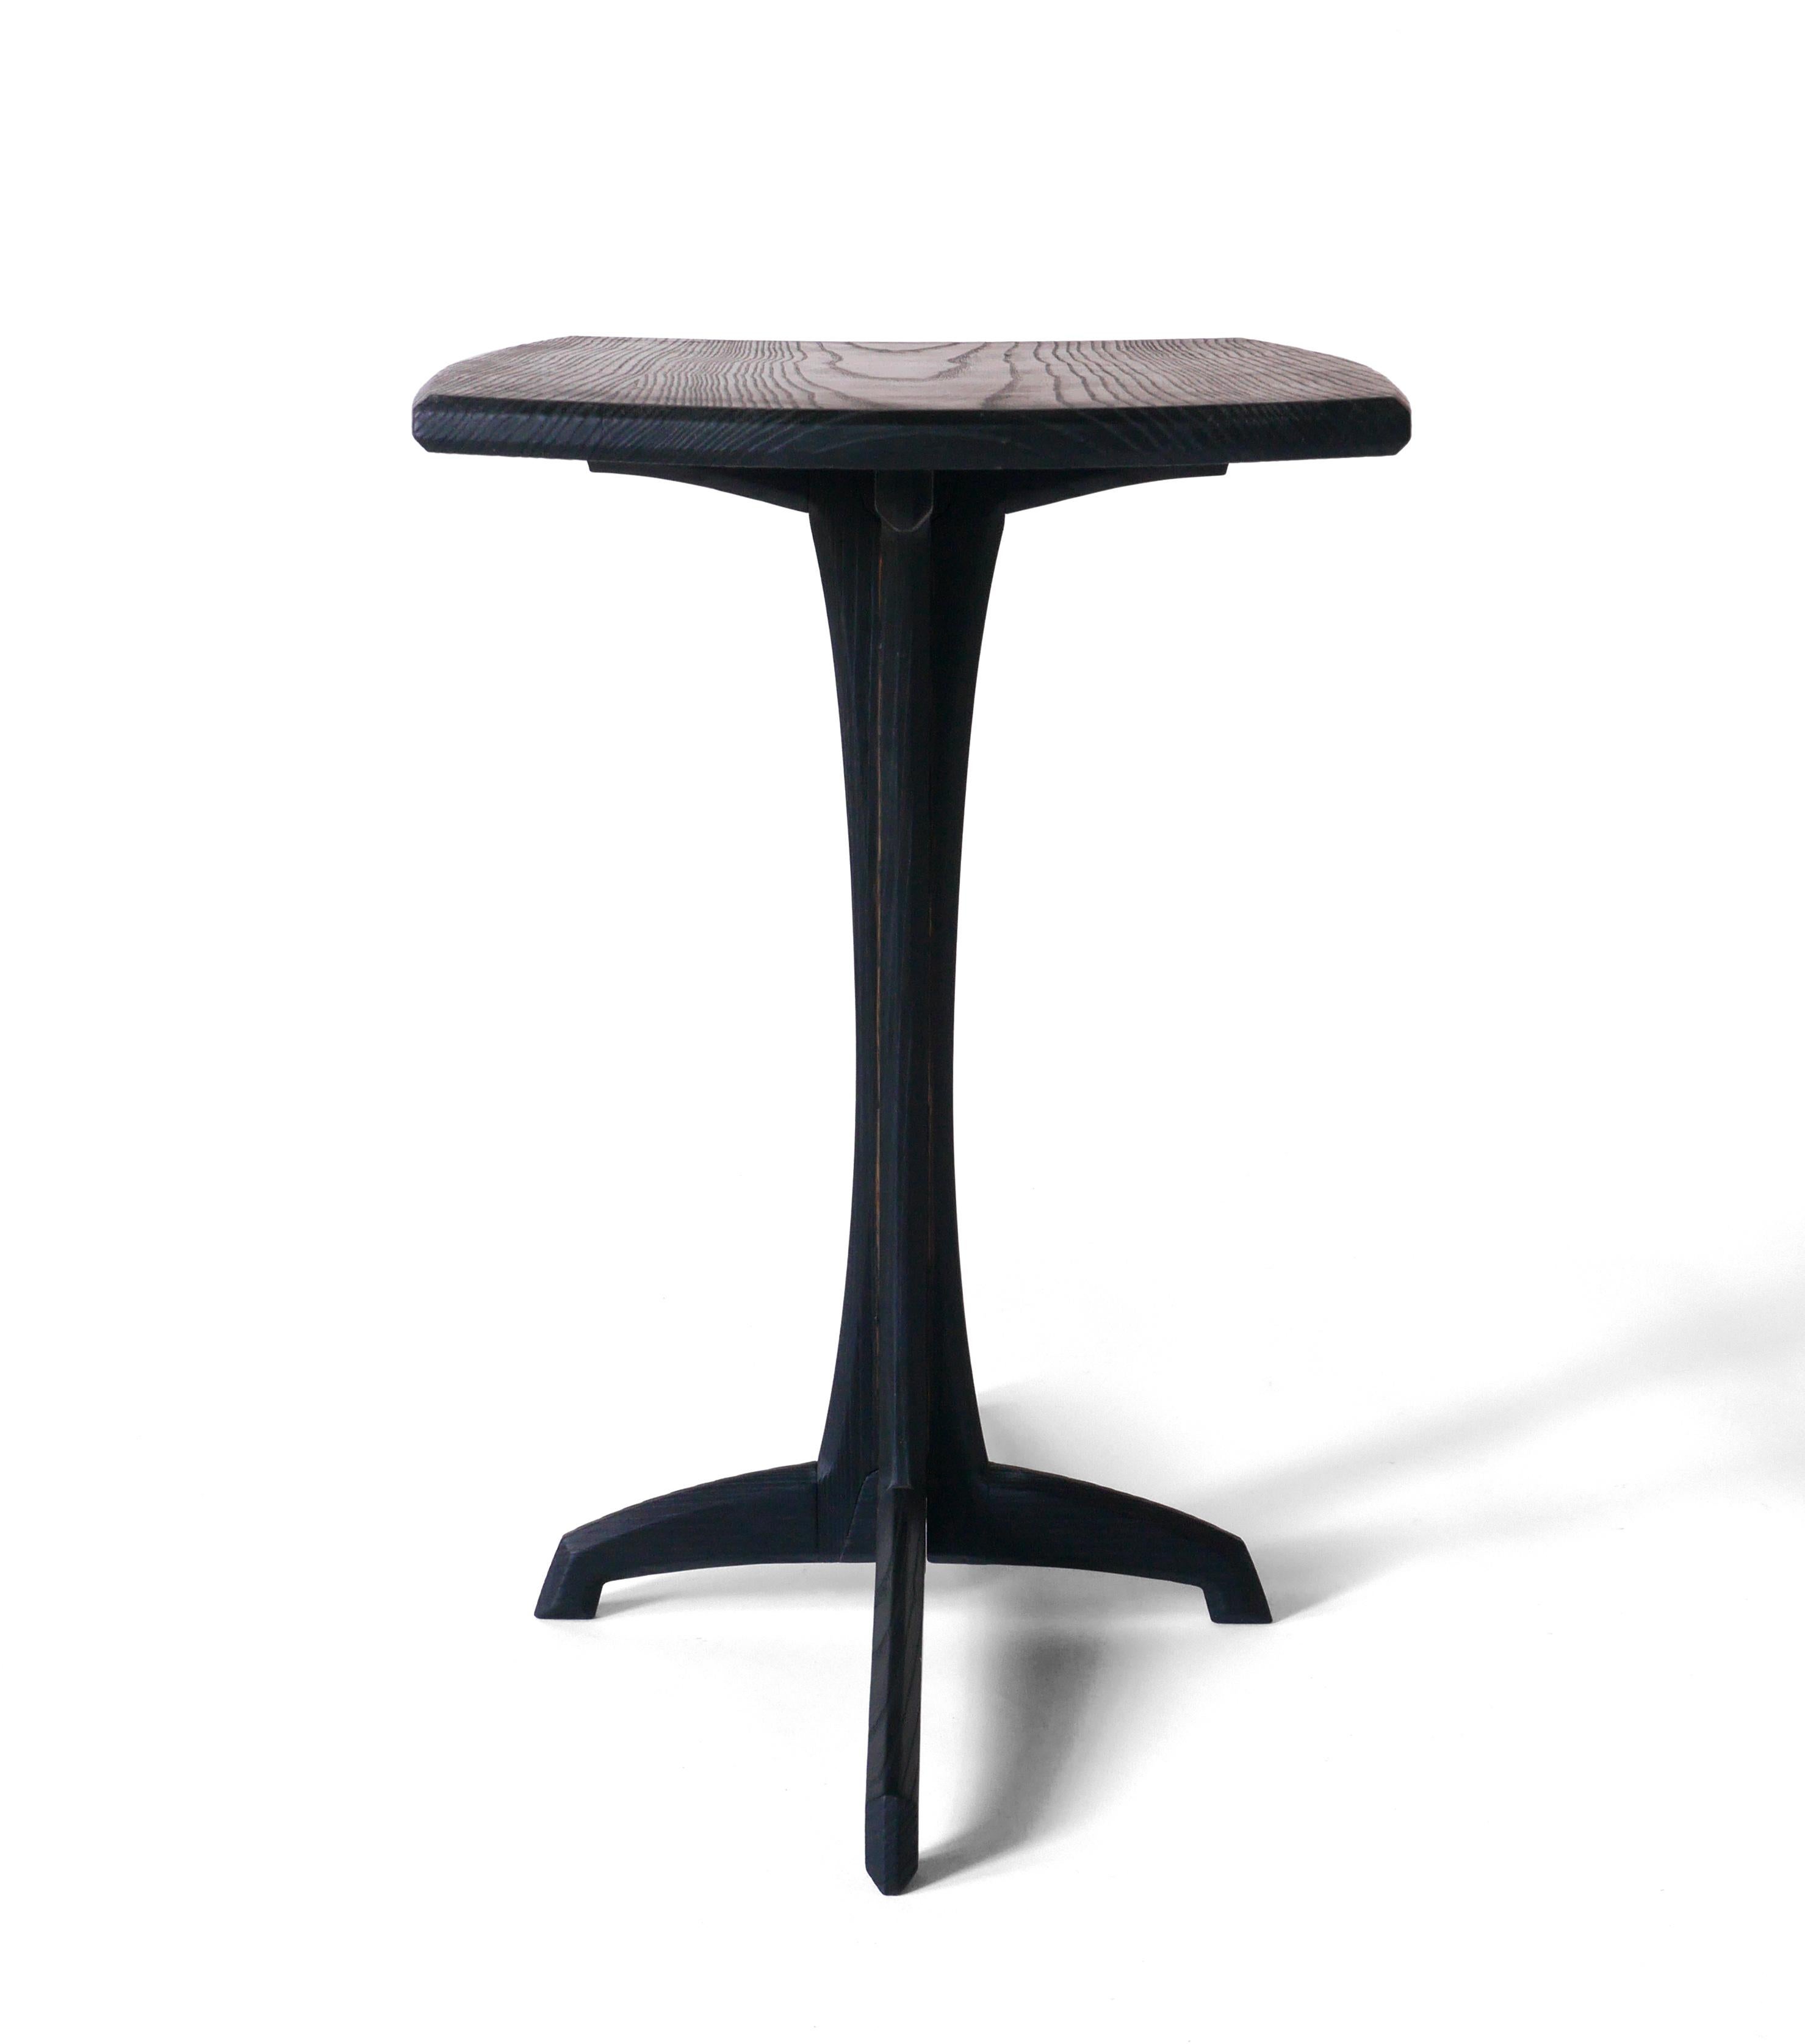 Blackened Burnt Ash Plume Side Table, Contemporary Handmade Pedestal End Table by Arid For Sale